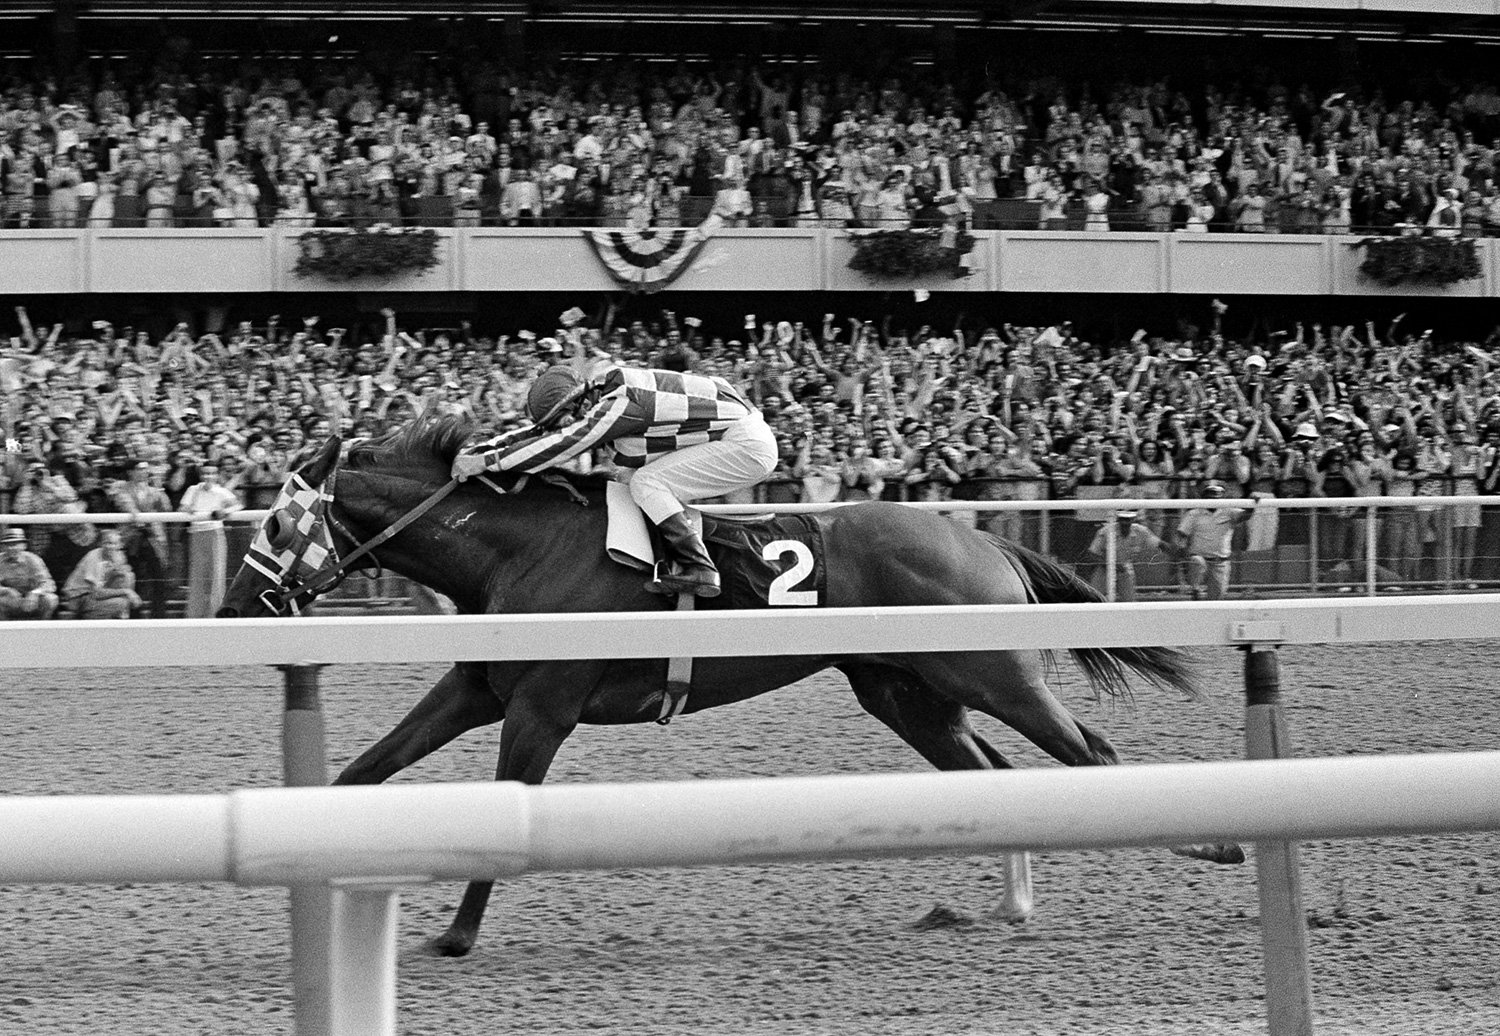  Ron Turcotte hangs on as Secretariat romps along the final stretch just before the finish line and a victory in the 105th running of the Belmont Stakes at Belmont Park in Elmont, N.Y., June 9, 1973. Secretariat became the ninth horse to win racing's